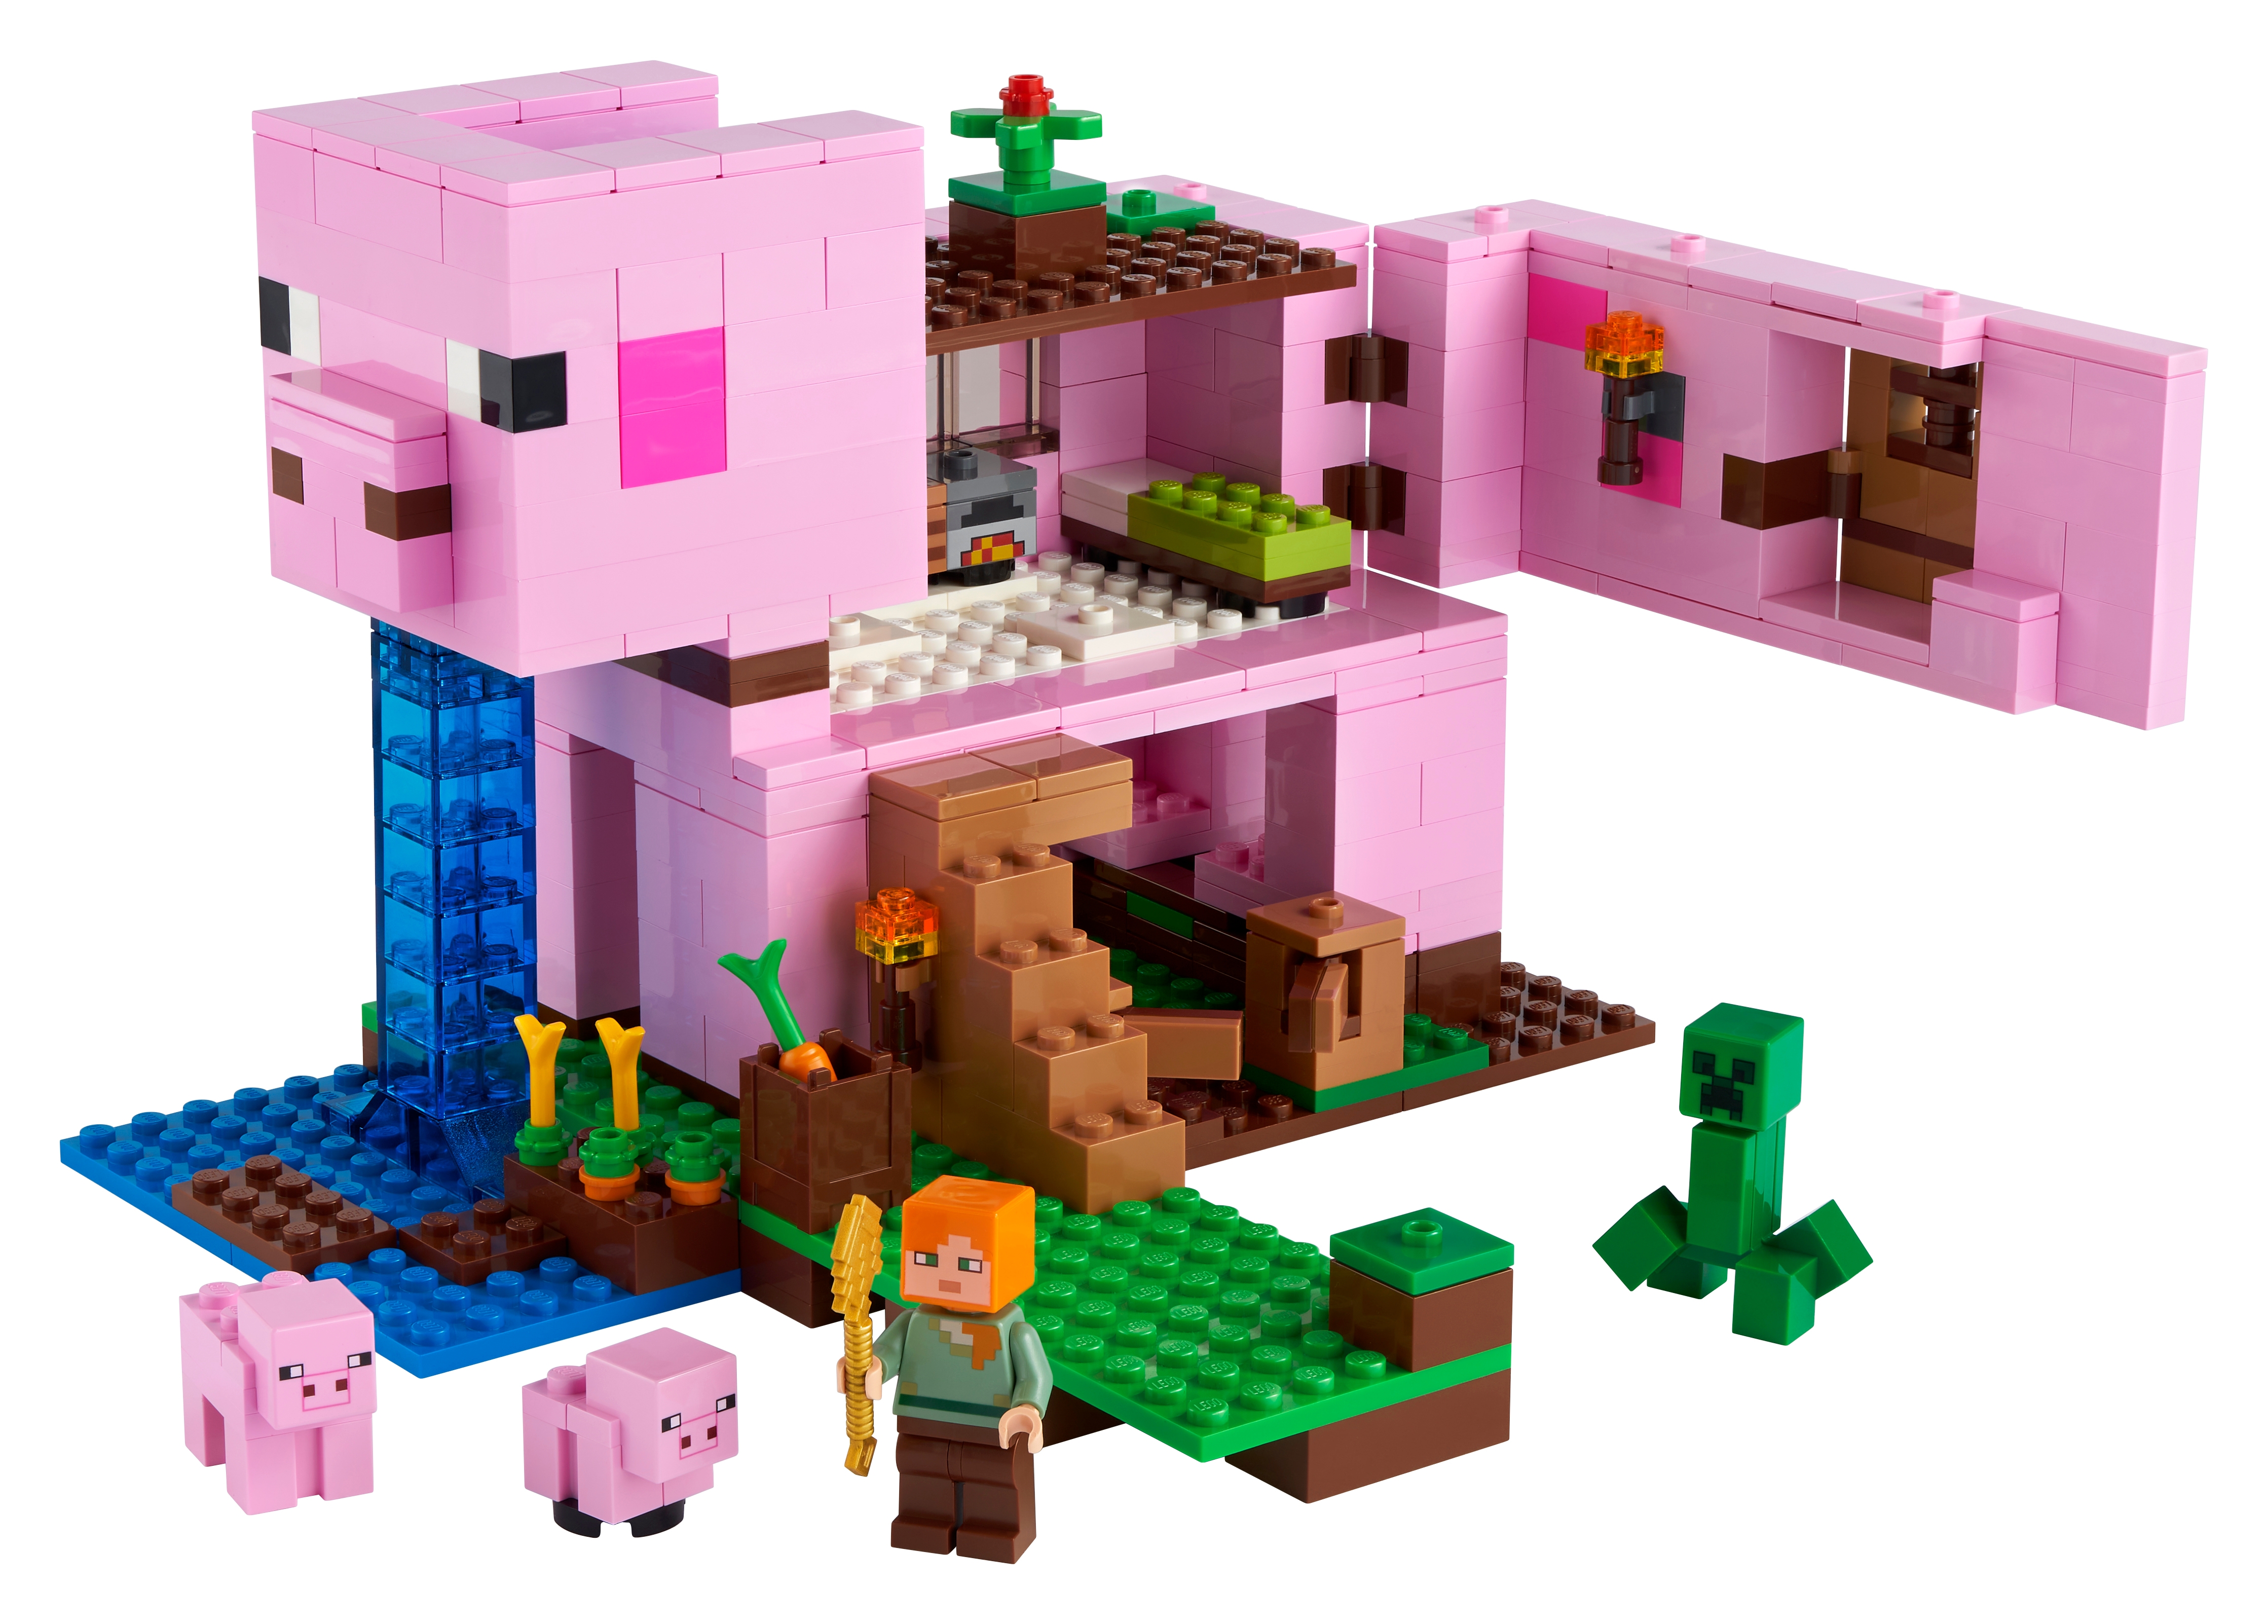 The Pig House 21170 | Minecraft® | Buy online at the LEGO® Shop US